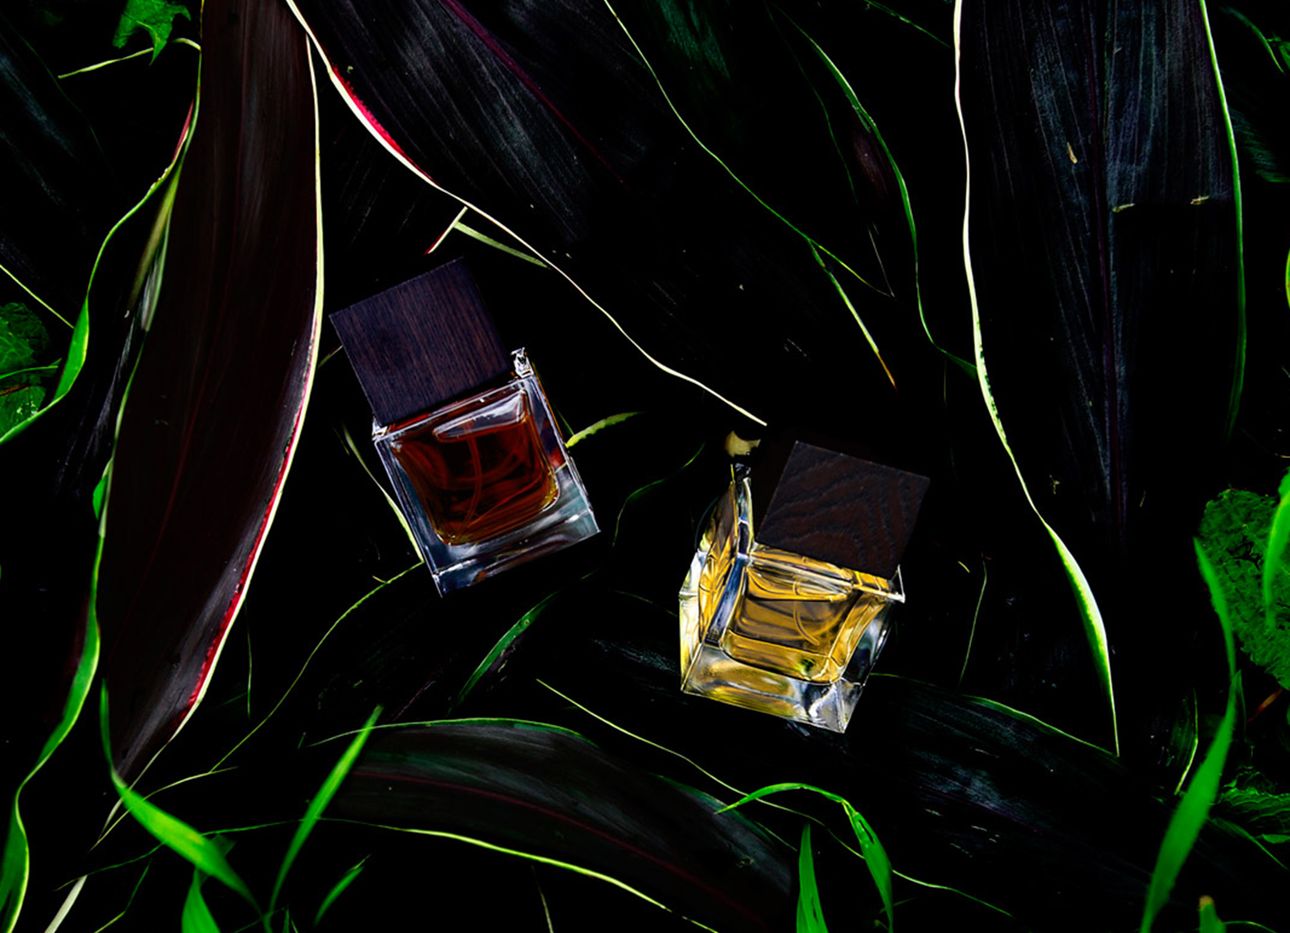 Two bottles of perfume in a darkly lit tangle of grass.